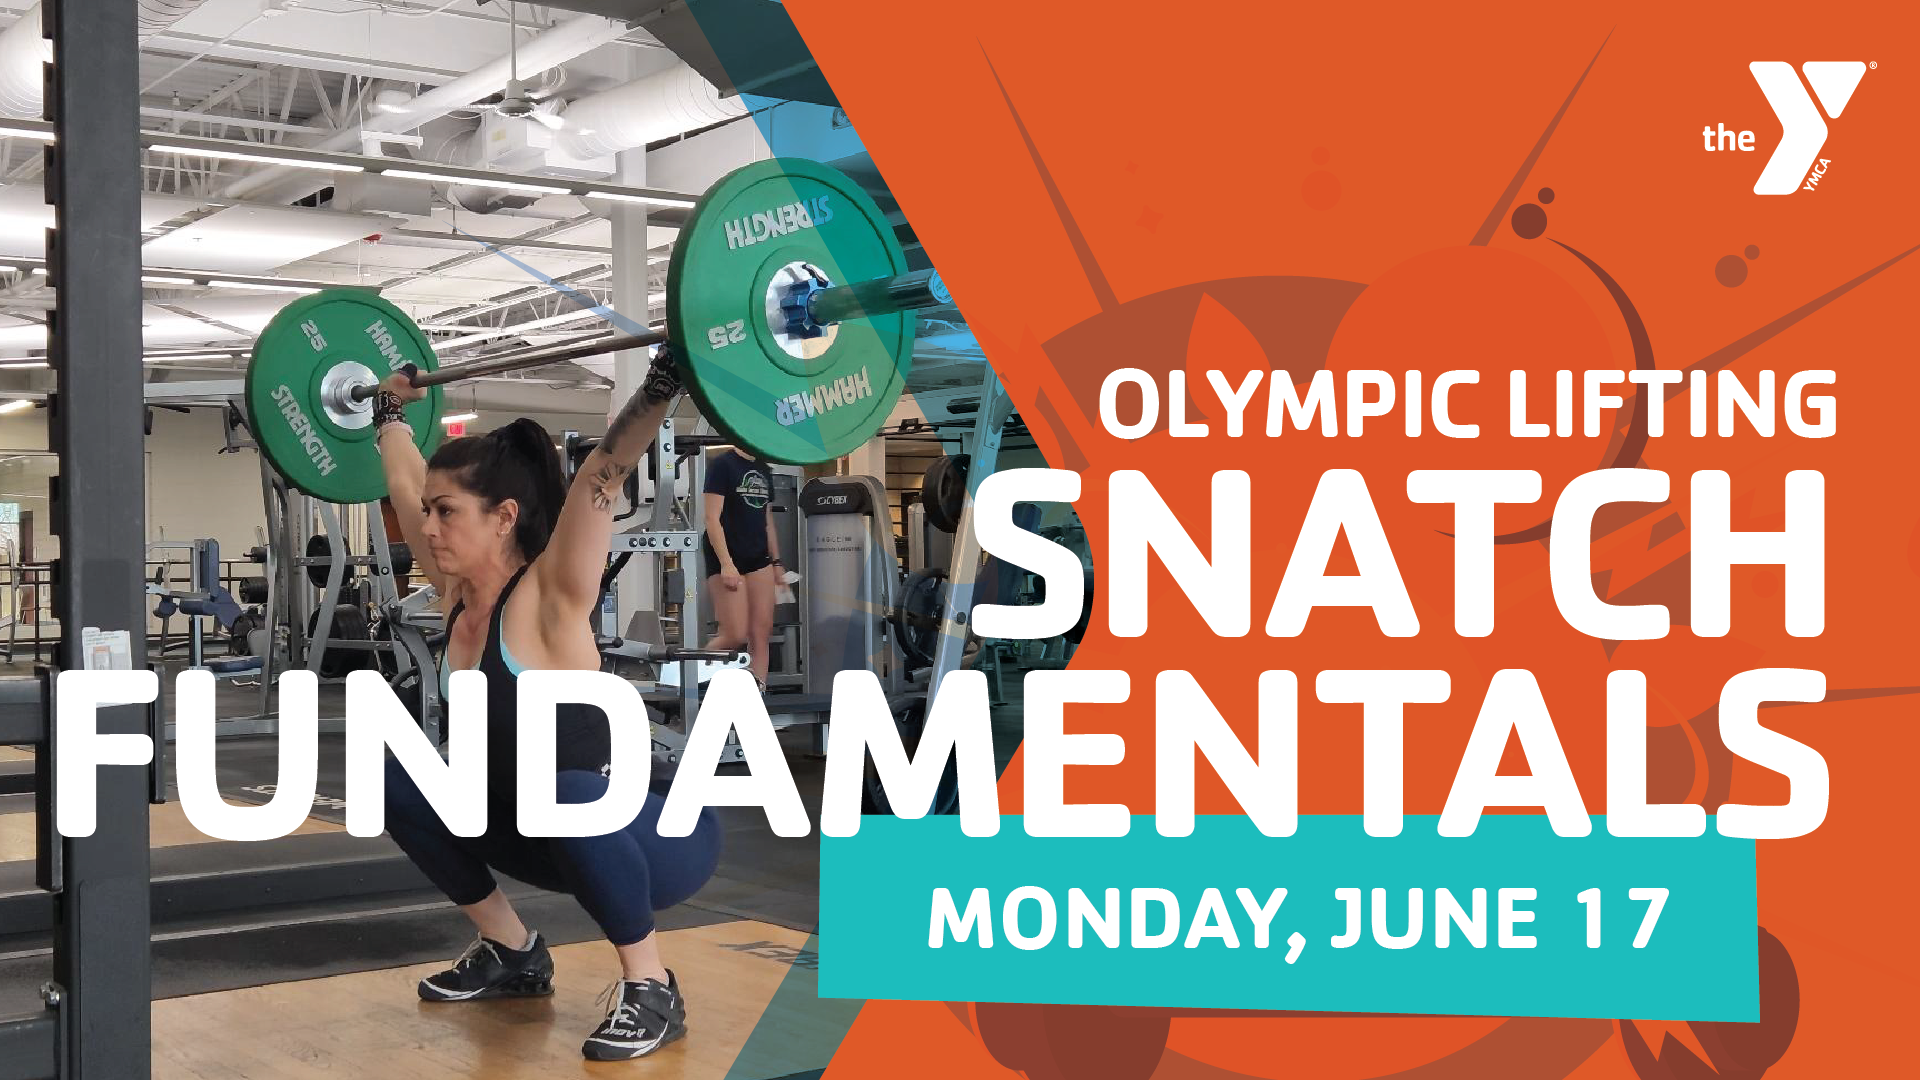 Featured image for “Olympic Lifting  Snatch Fundamentals”